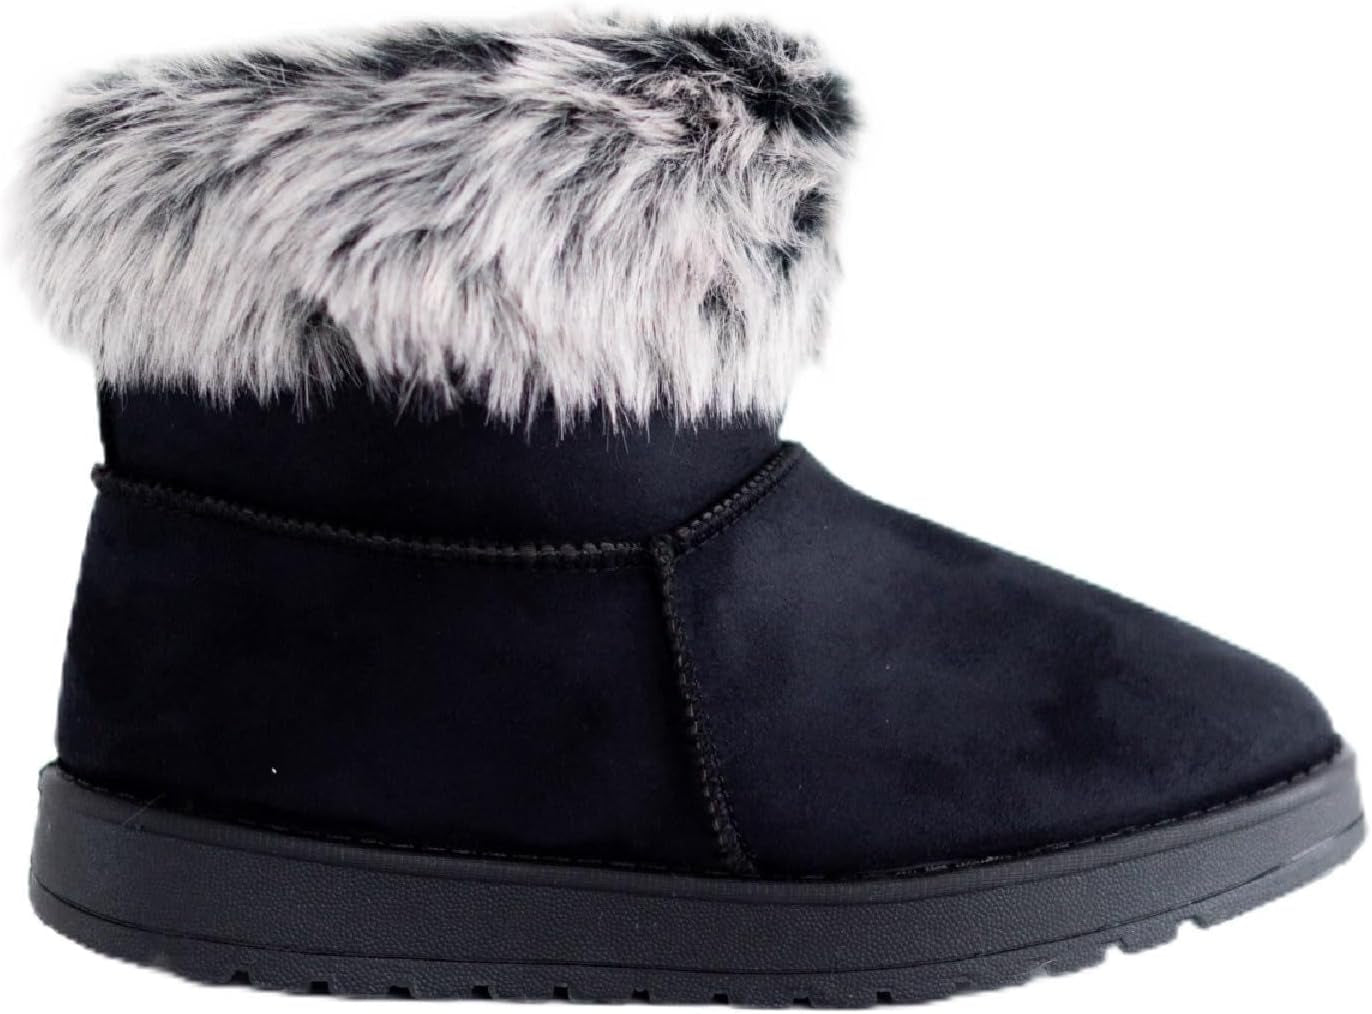 WOMENS FAUX FLUFFY FUR LINED WARM LADIES ANKLE WINTER SNUGG SHOES BOOTS SIZES